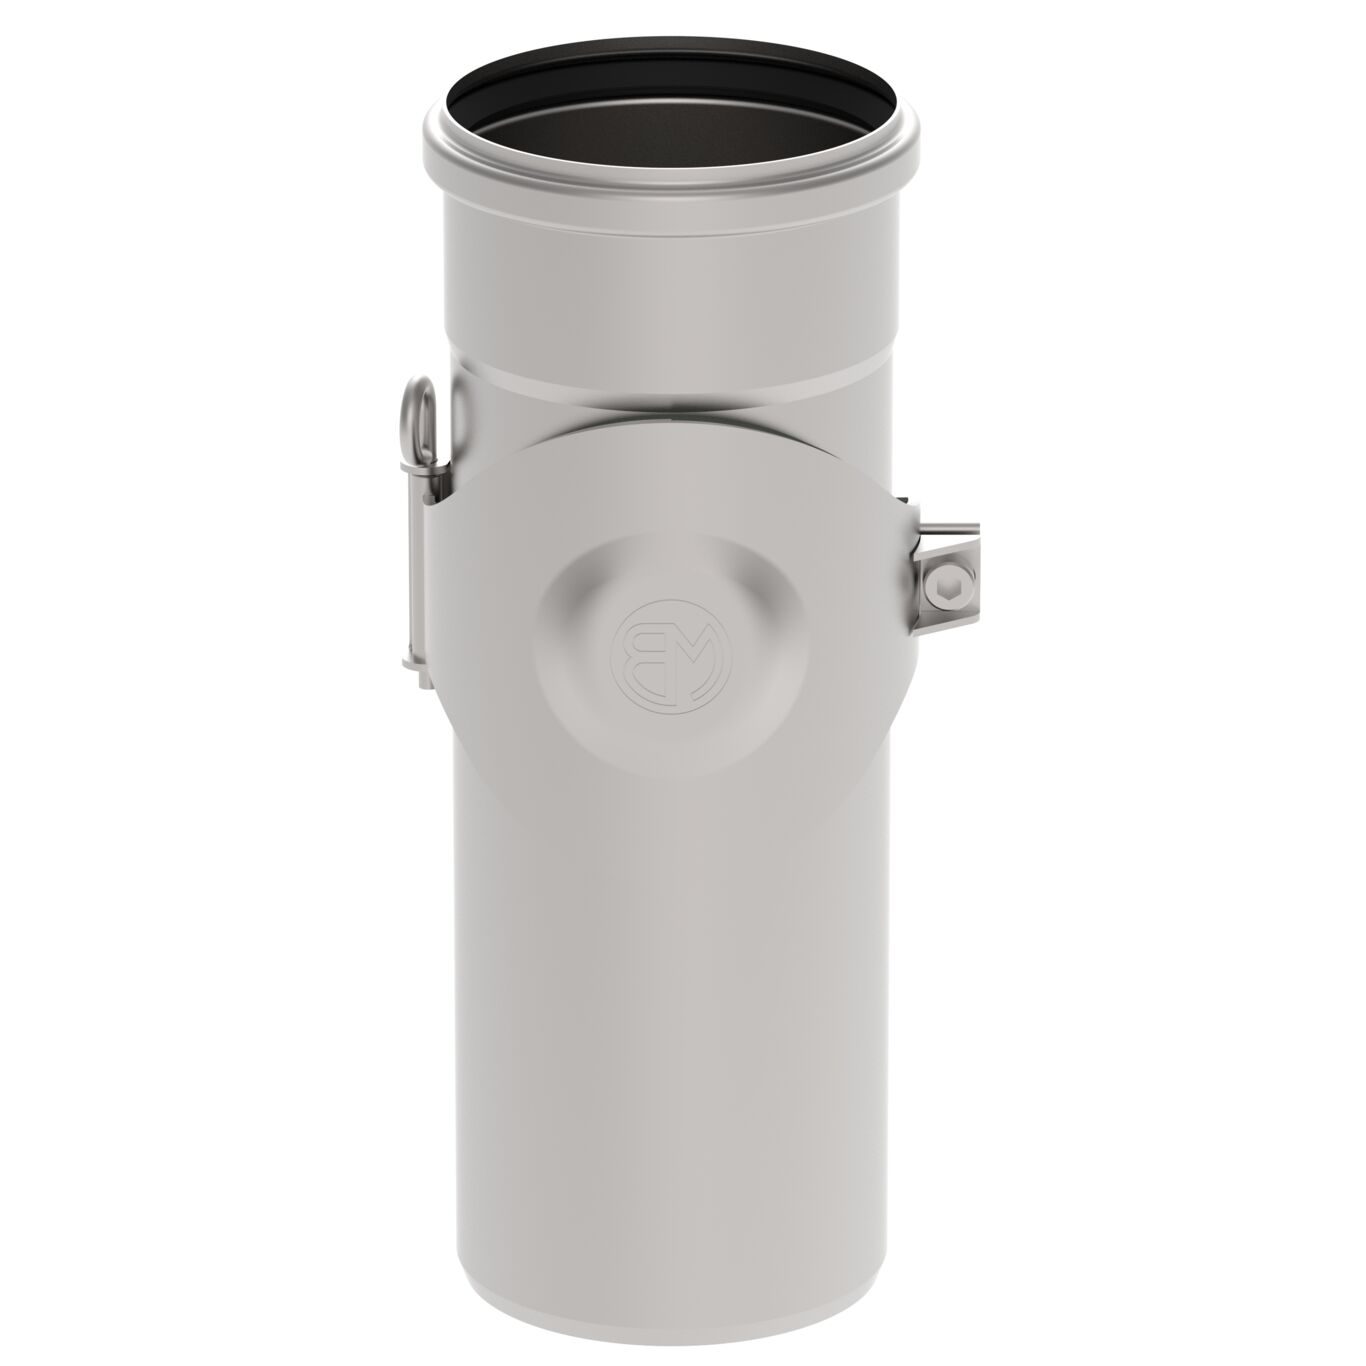 Product Image - Straight pipe-access